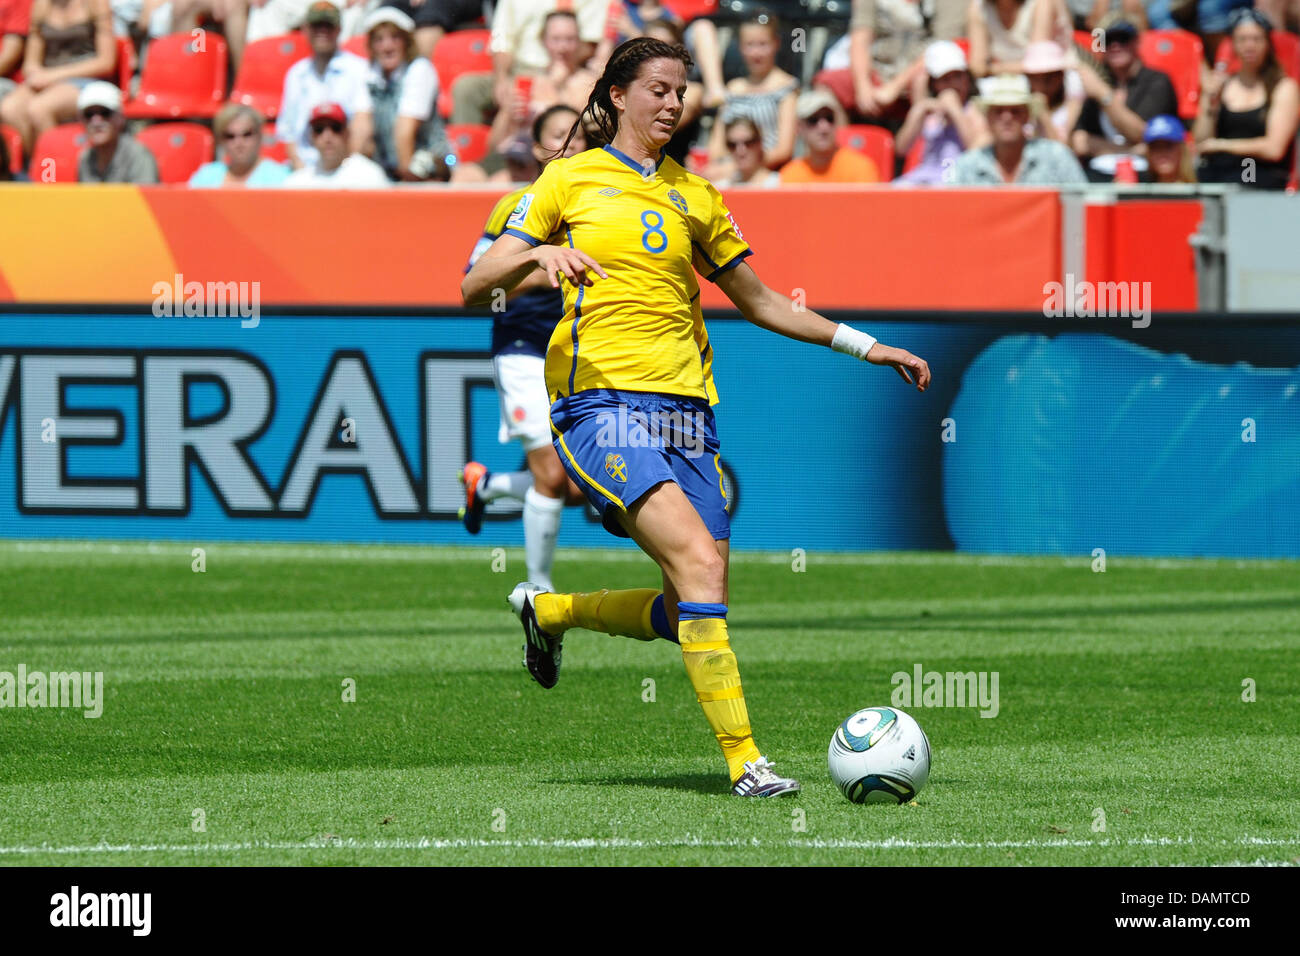 Sweden's Lotta Schelin is pictured during the Group C match against Colombia of the FIFA Women's World Cup 2011 in Leverkusen, Germany, 28 June 2011. Photo: Revierfoto Stock Photo